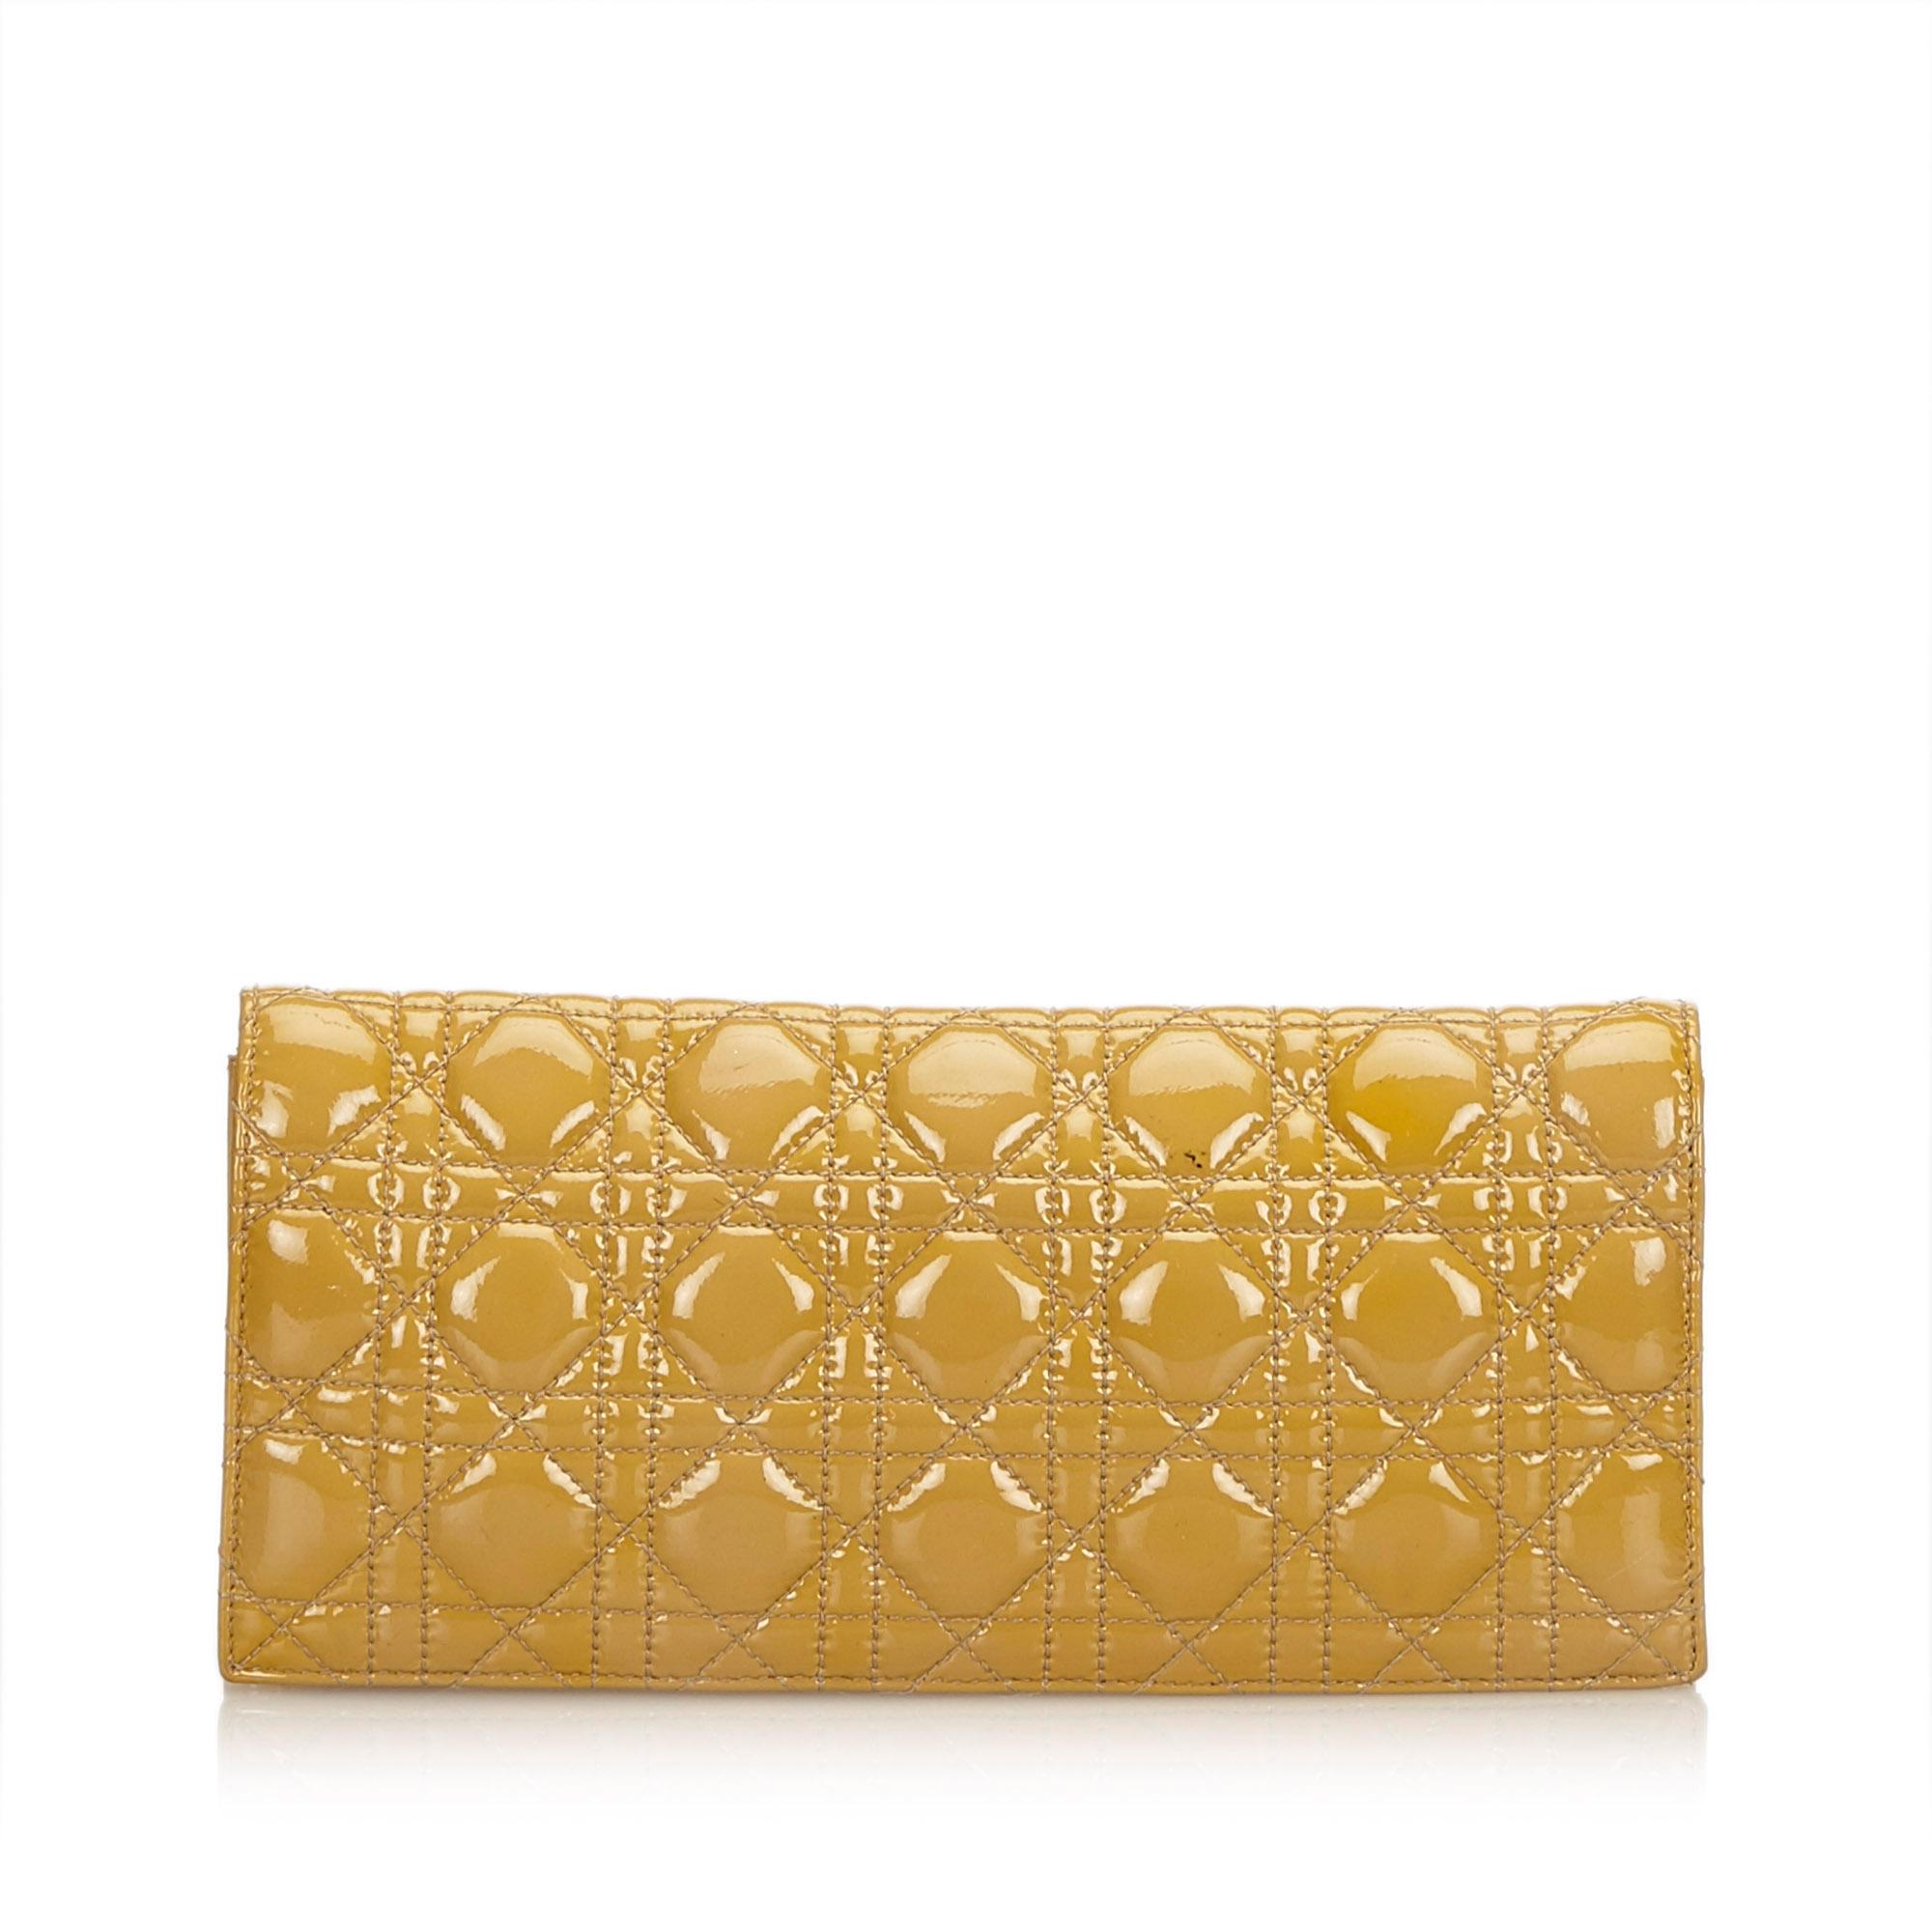 Dior Yellow Cannage Patent Leather Chain Clutch Bag (Gelb)